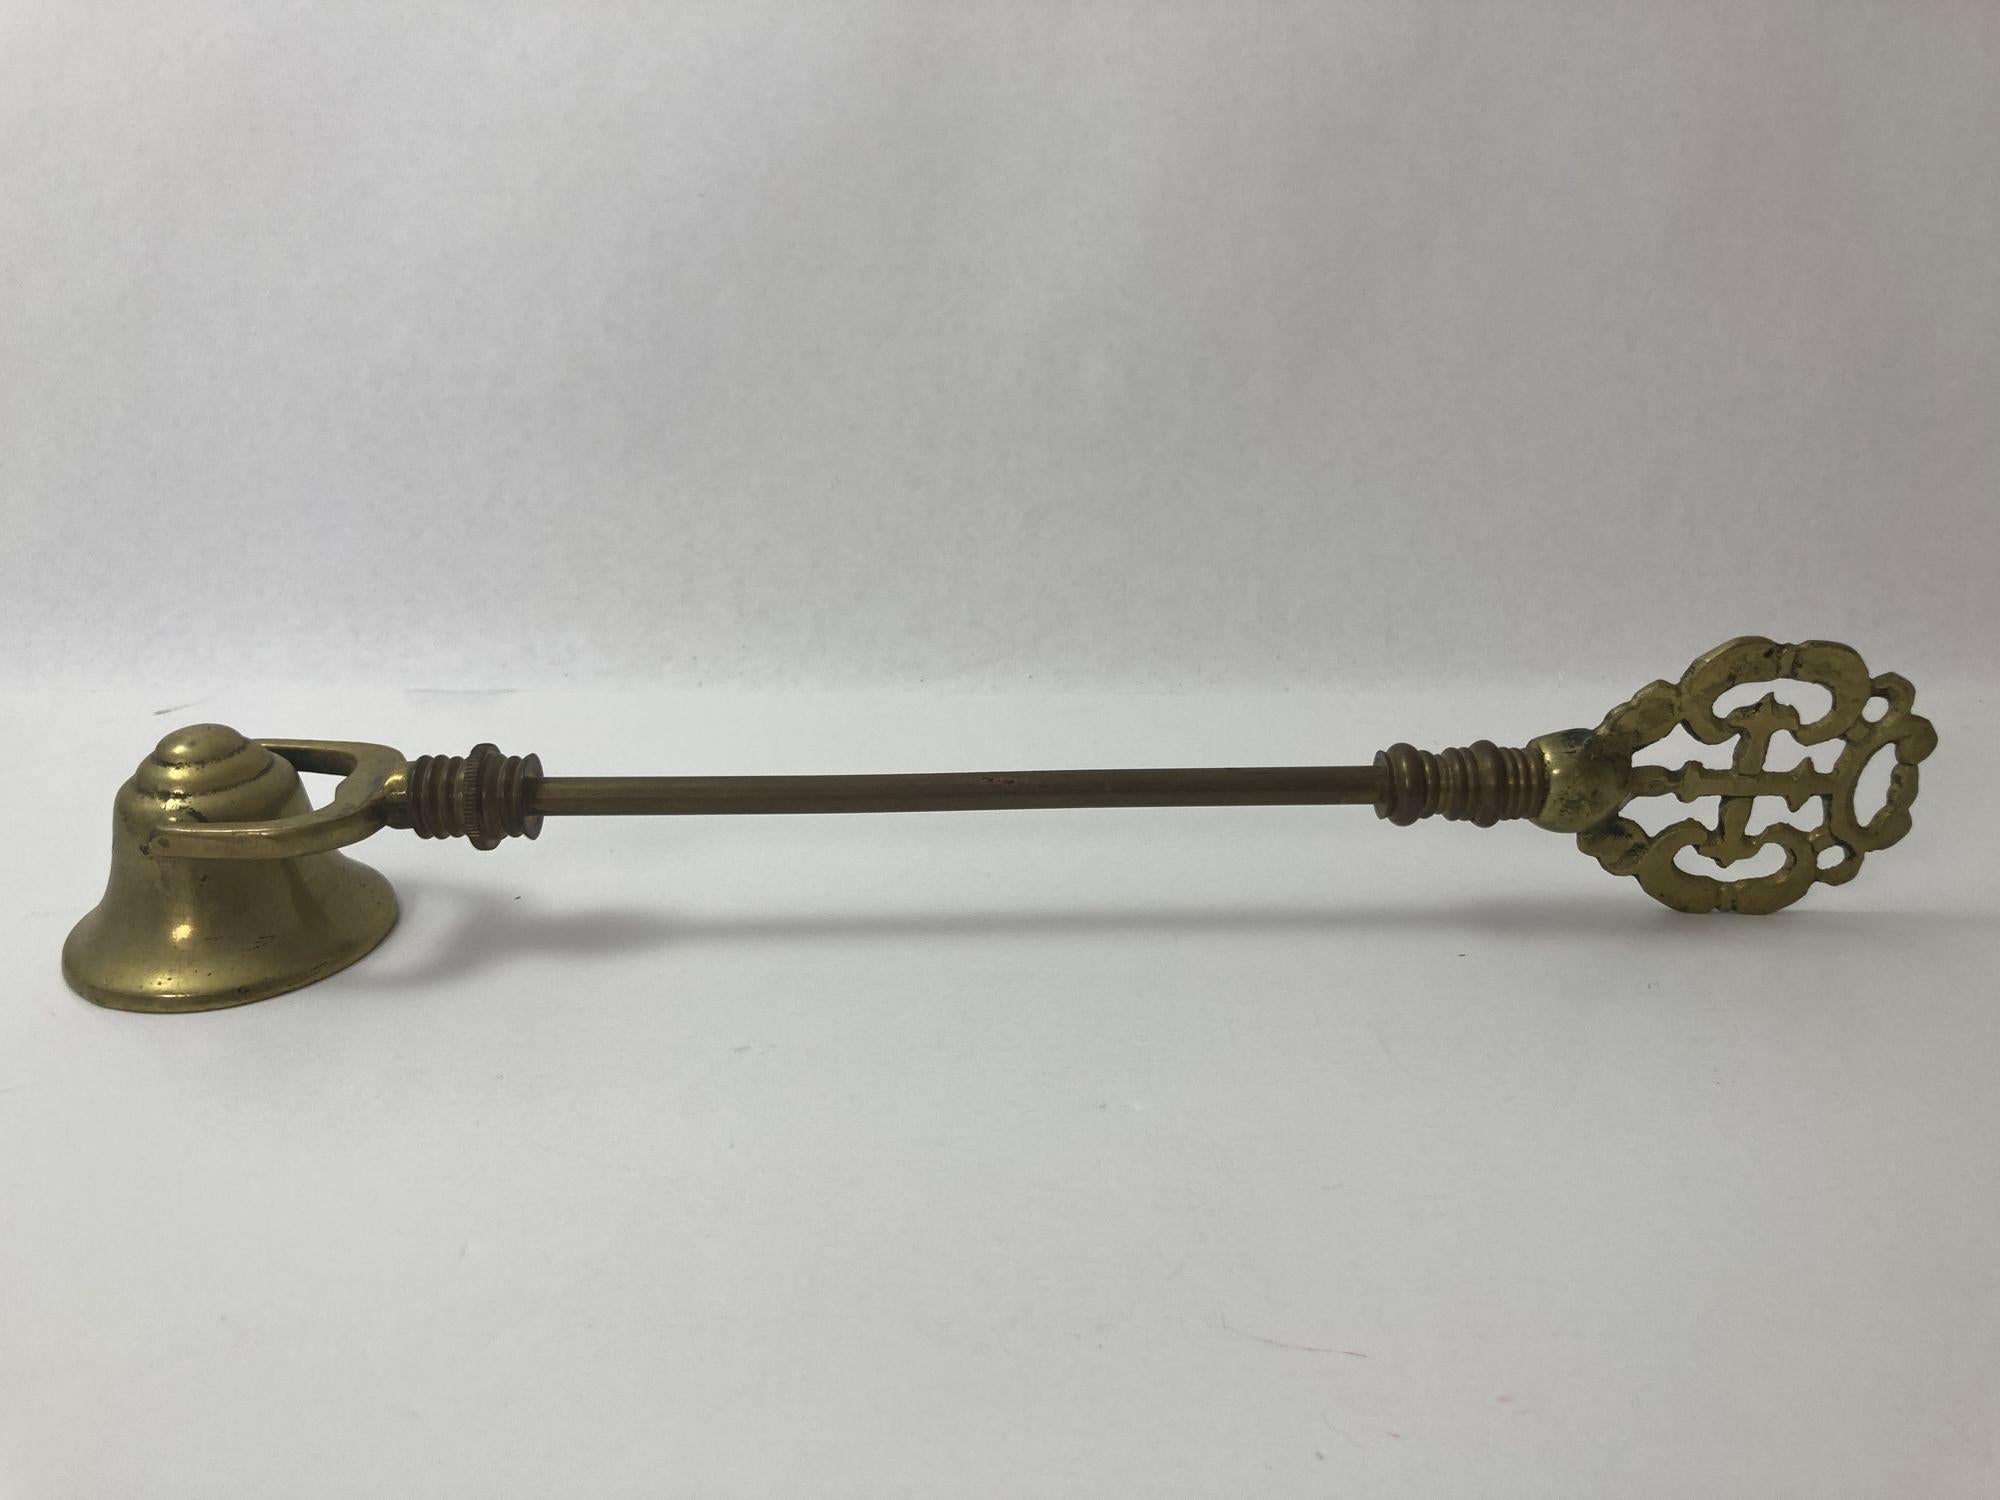 Antique Large British Victorian Ornate Brass Candle Snuffer.
Polished brass candle snuffer with pierced handle.
Victorian ornate large heavy vintage brass candle snuffer.
Substantial wonderfully decorated handle.
Cup has a rotation bar for easy